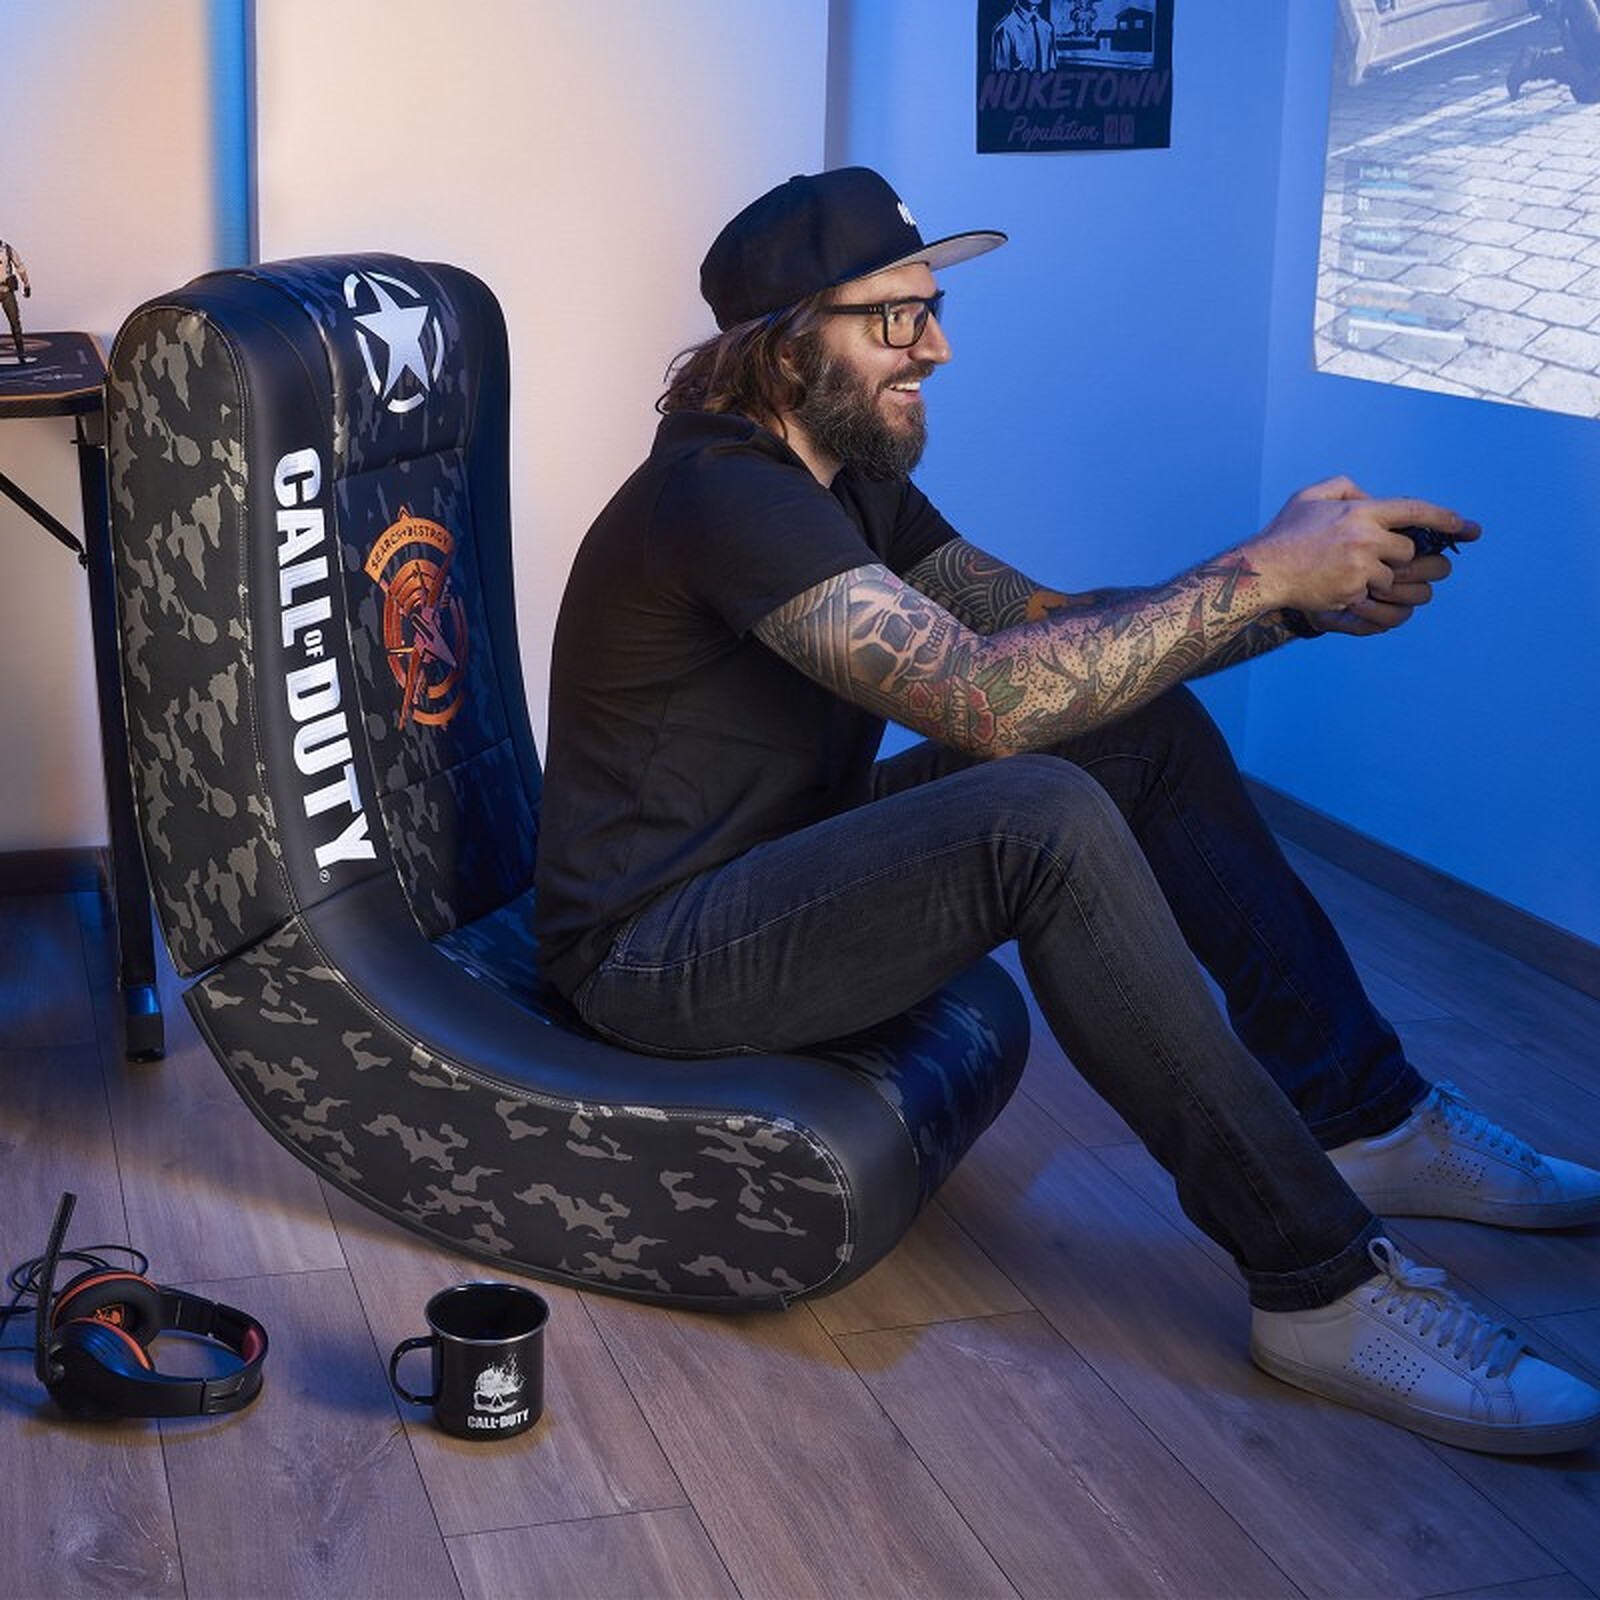 Siège gaming Iron Maiden Subsonic –